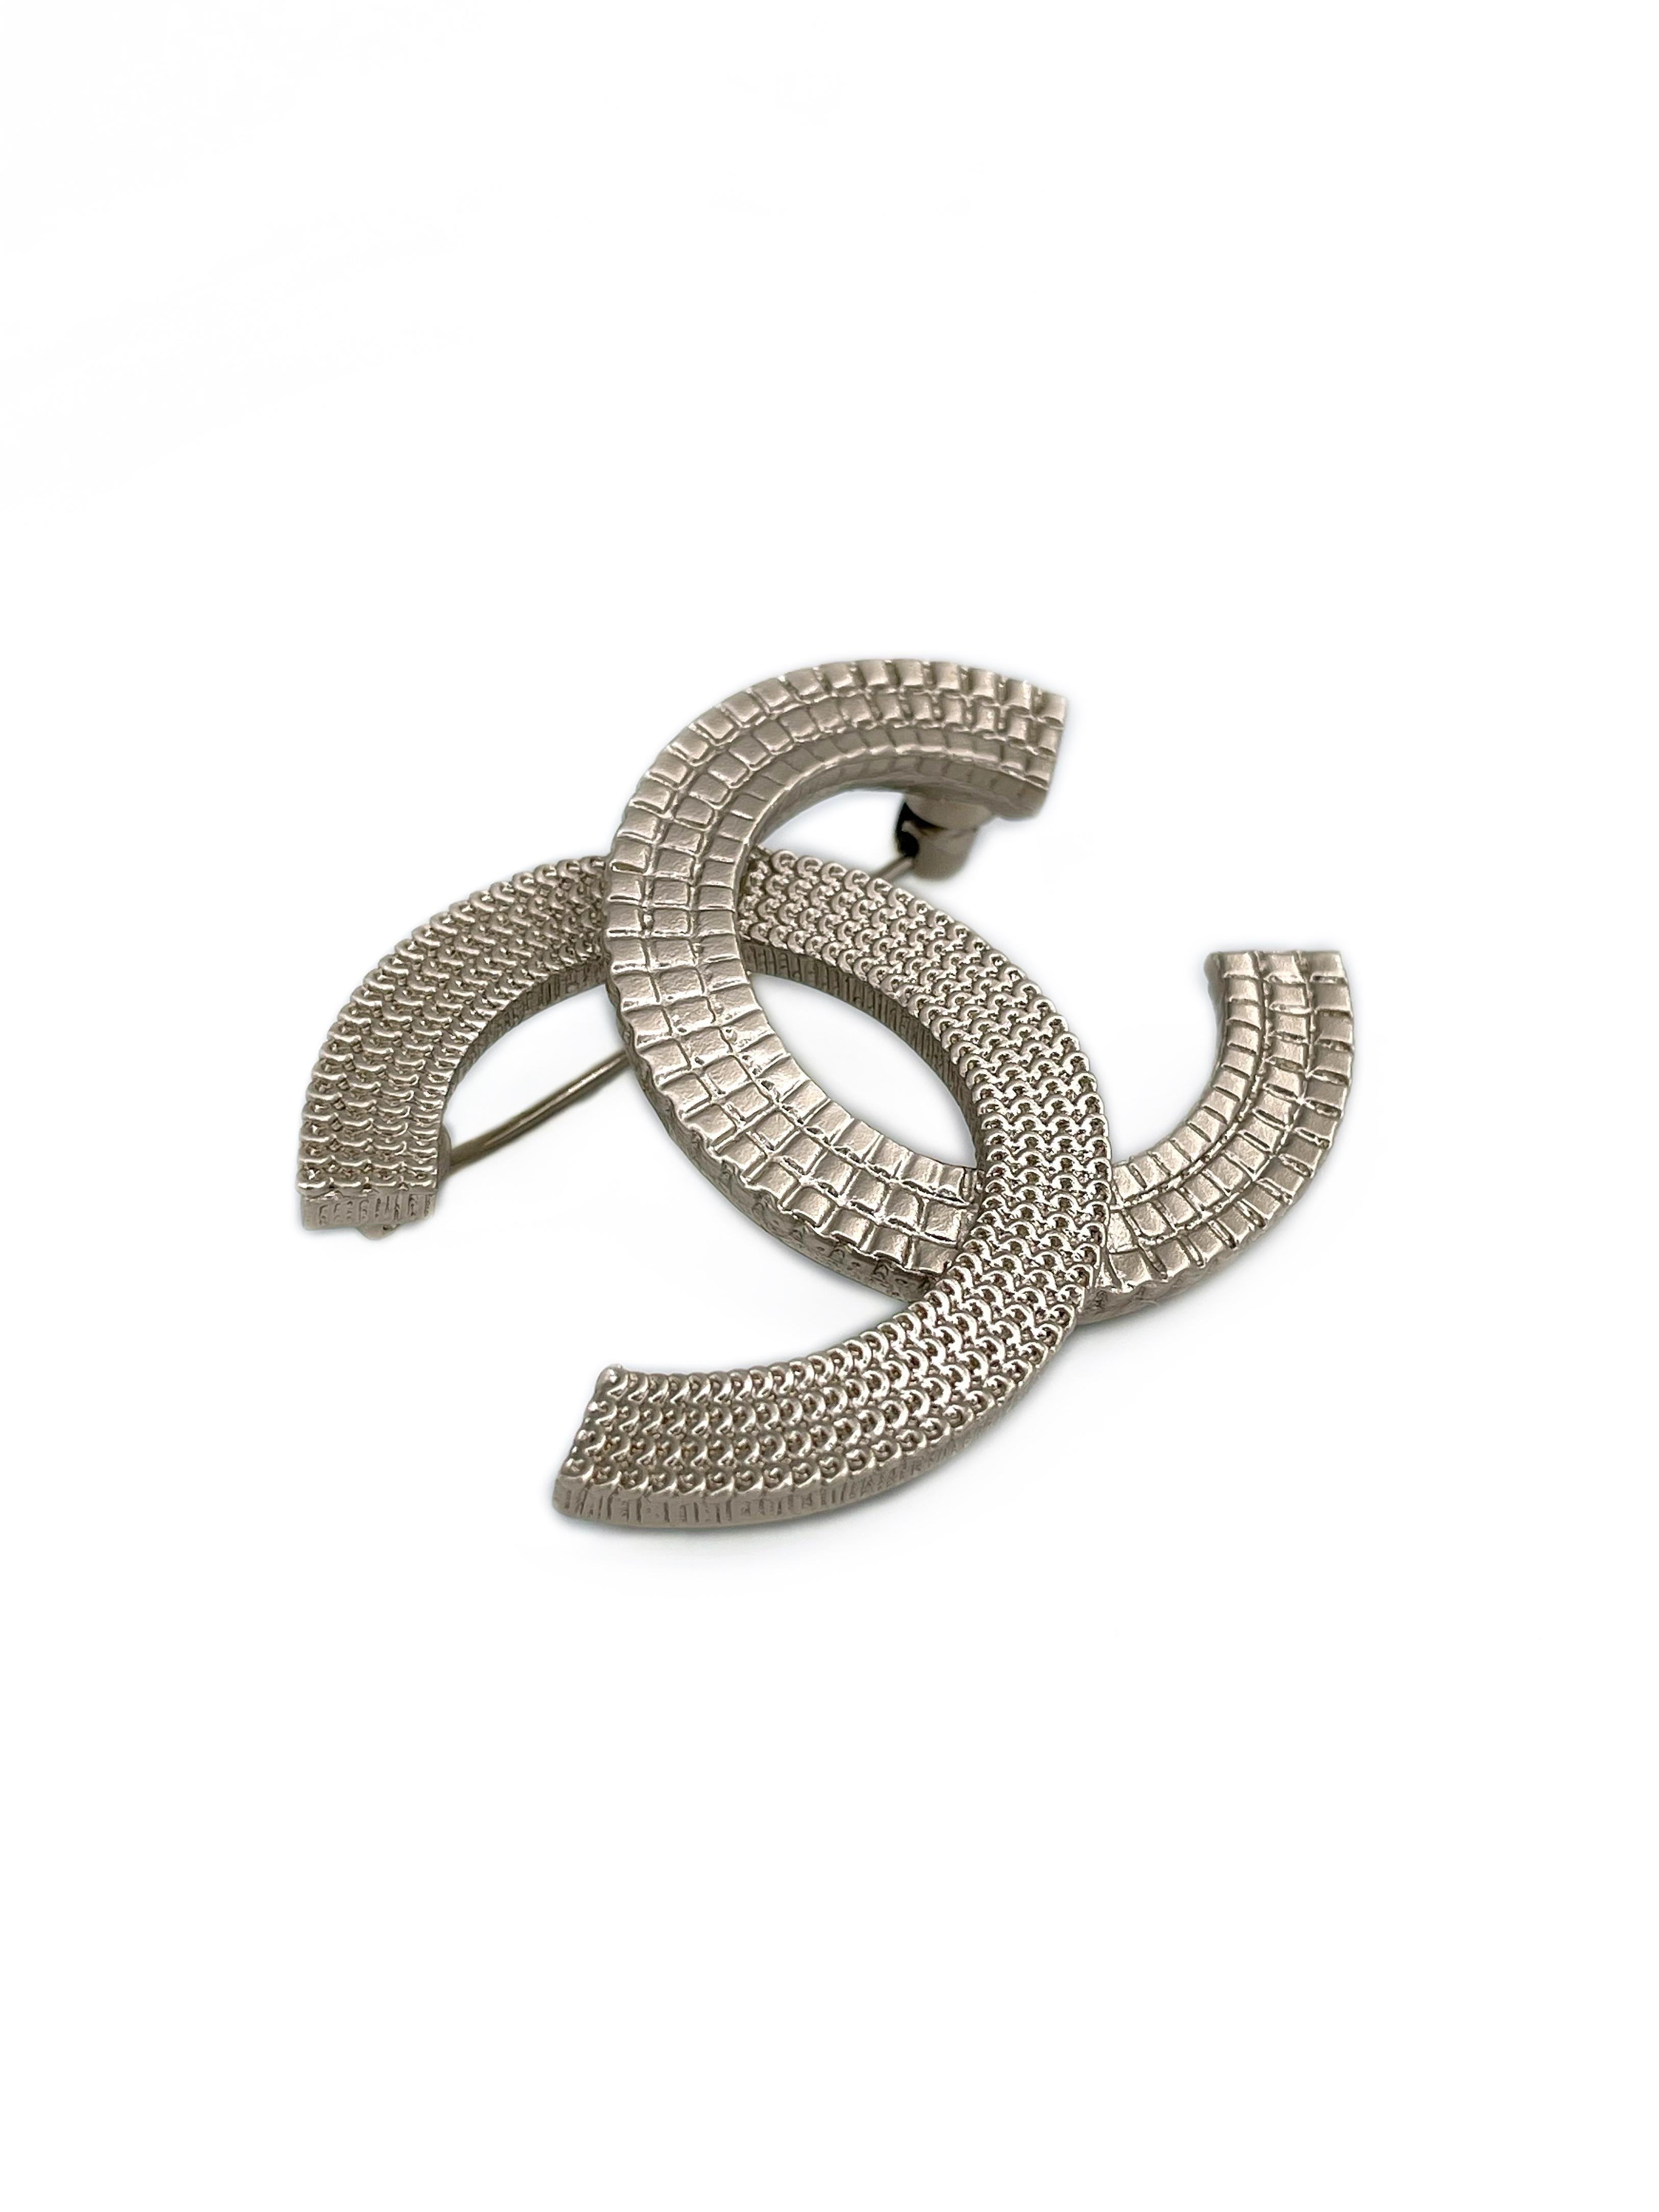 This is a CC logo pin brooch designed by Chanel for 2022 collection. The piece is pale gold tone with texture.  

Signed: ©Chanel® A22P. Made in France

Size: 4.5x3.5cm

———

If you have any questions, please feel free to ask. We describe our items